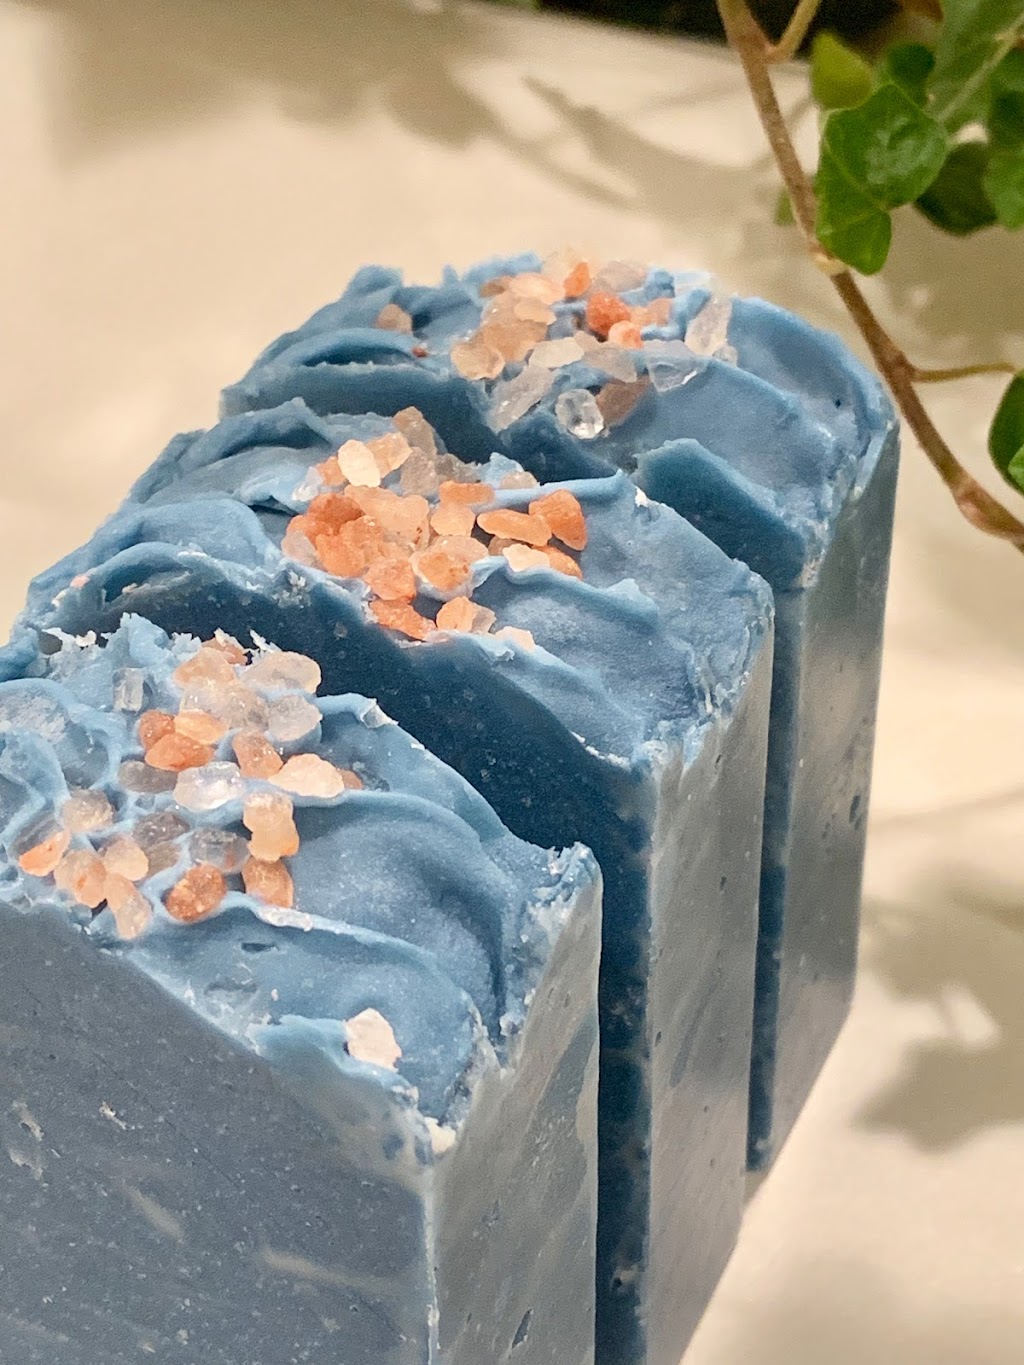 SOAPLICIOUS LLC, Handcrafted Soaps | 675 Townsend Ave UNIT 147, New Haven, CT 06512 | Phone: (929) 312-1297